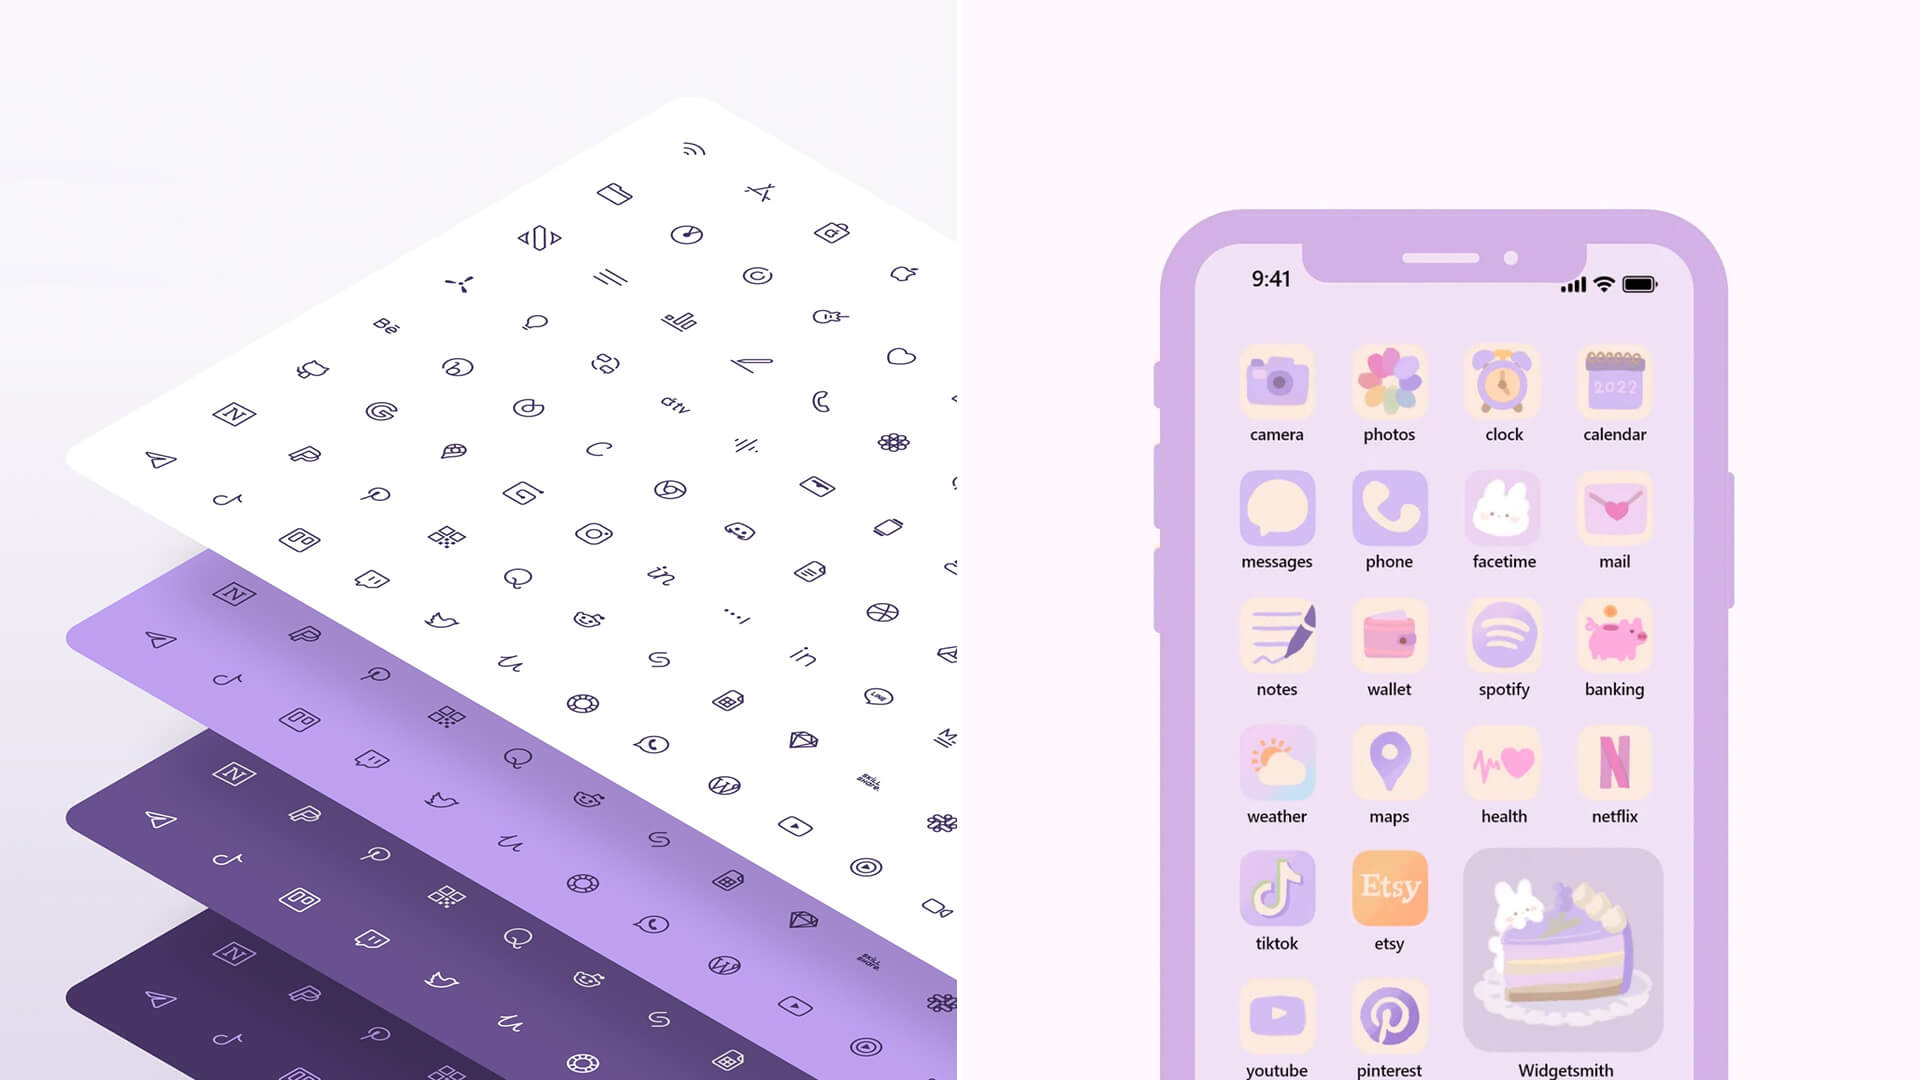 Top 10 Best Purple Aesthetic iPhone Wallpapers [ HQ ]